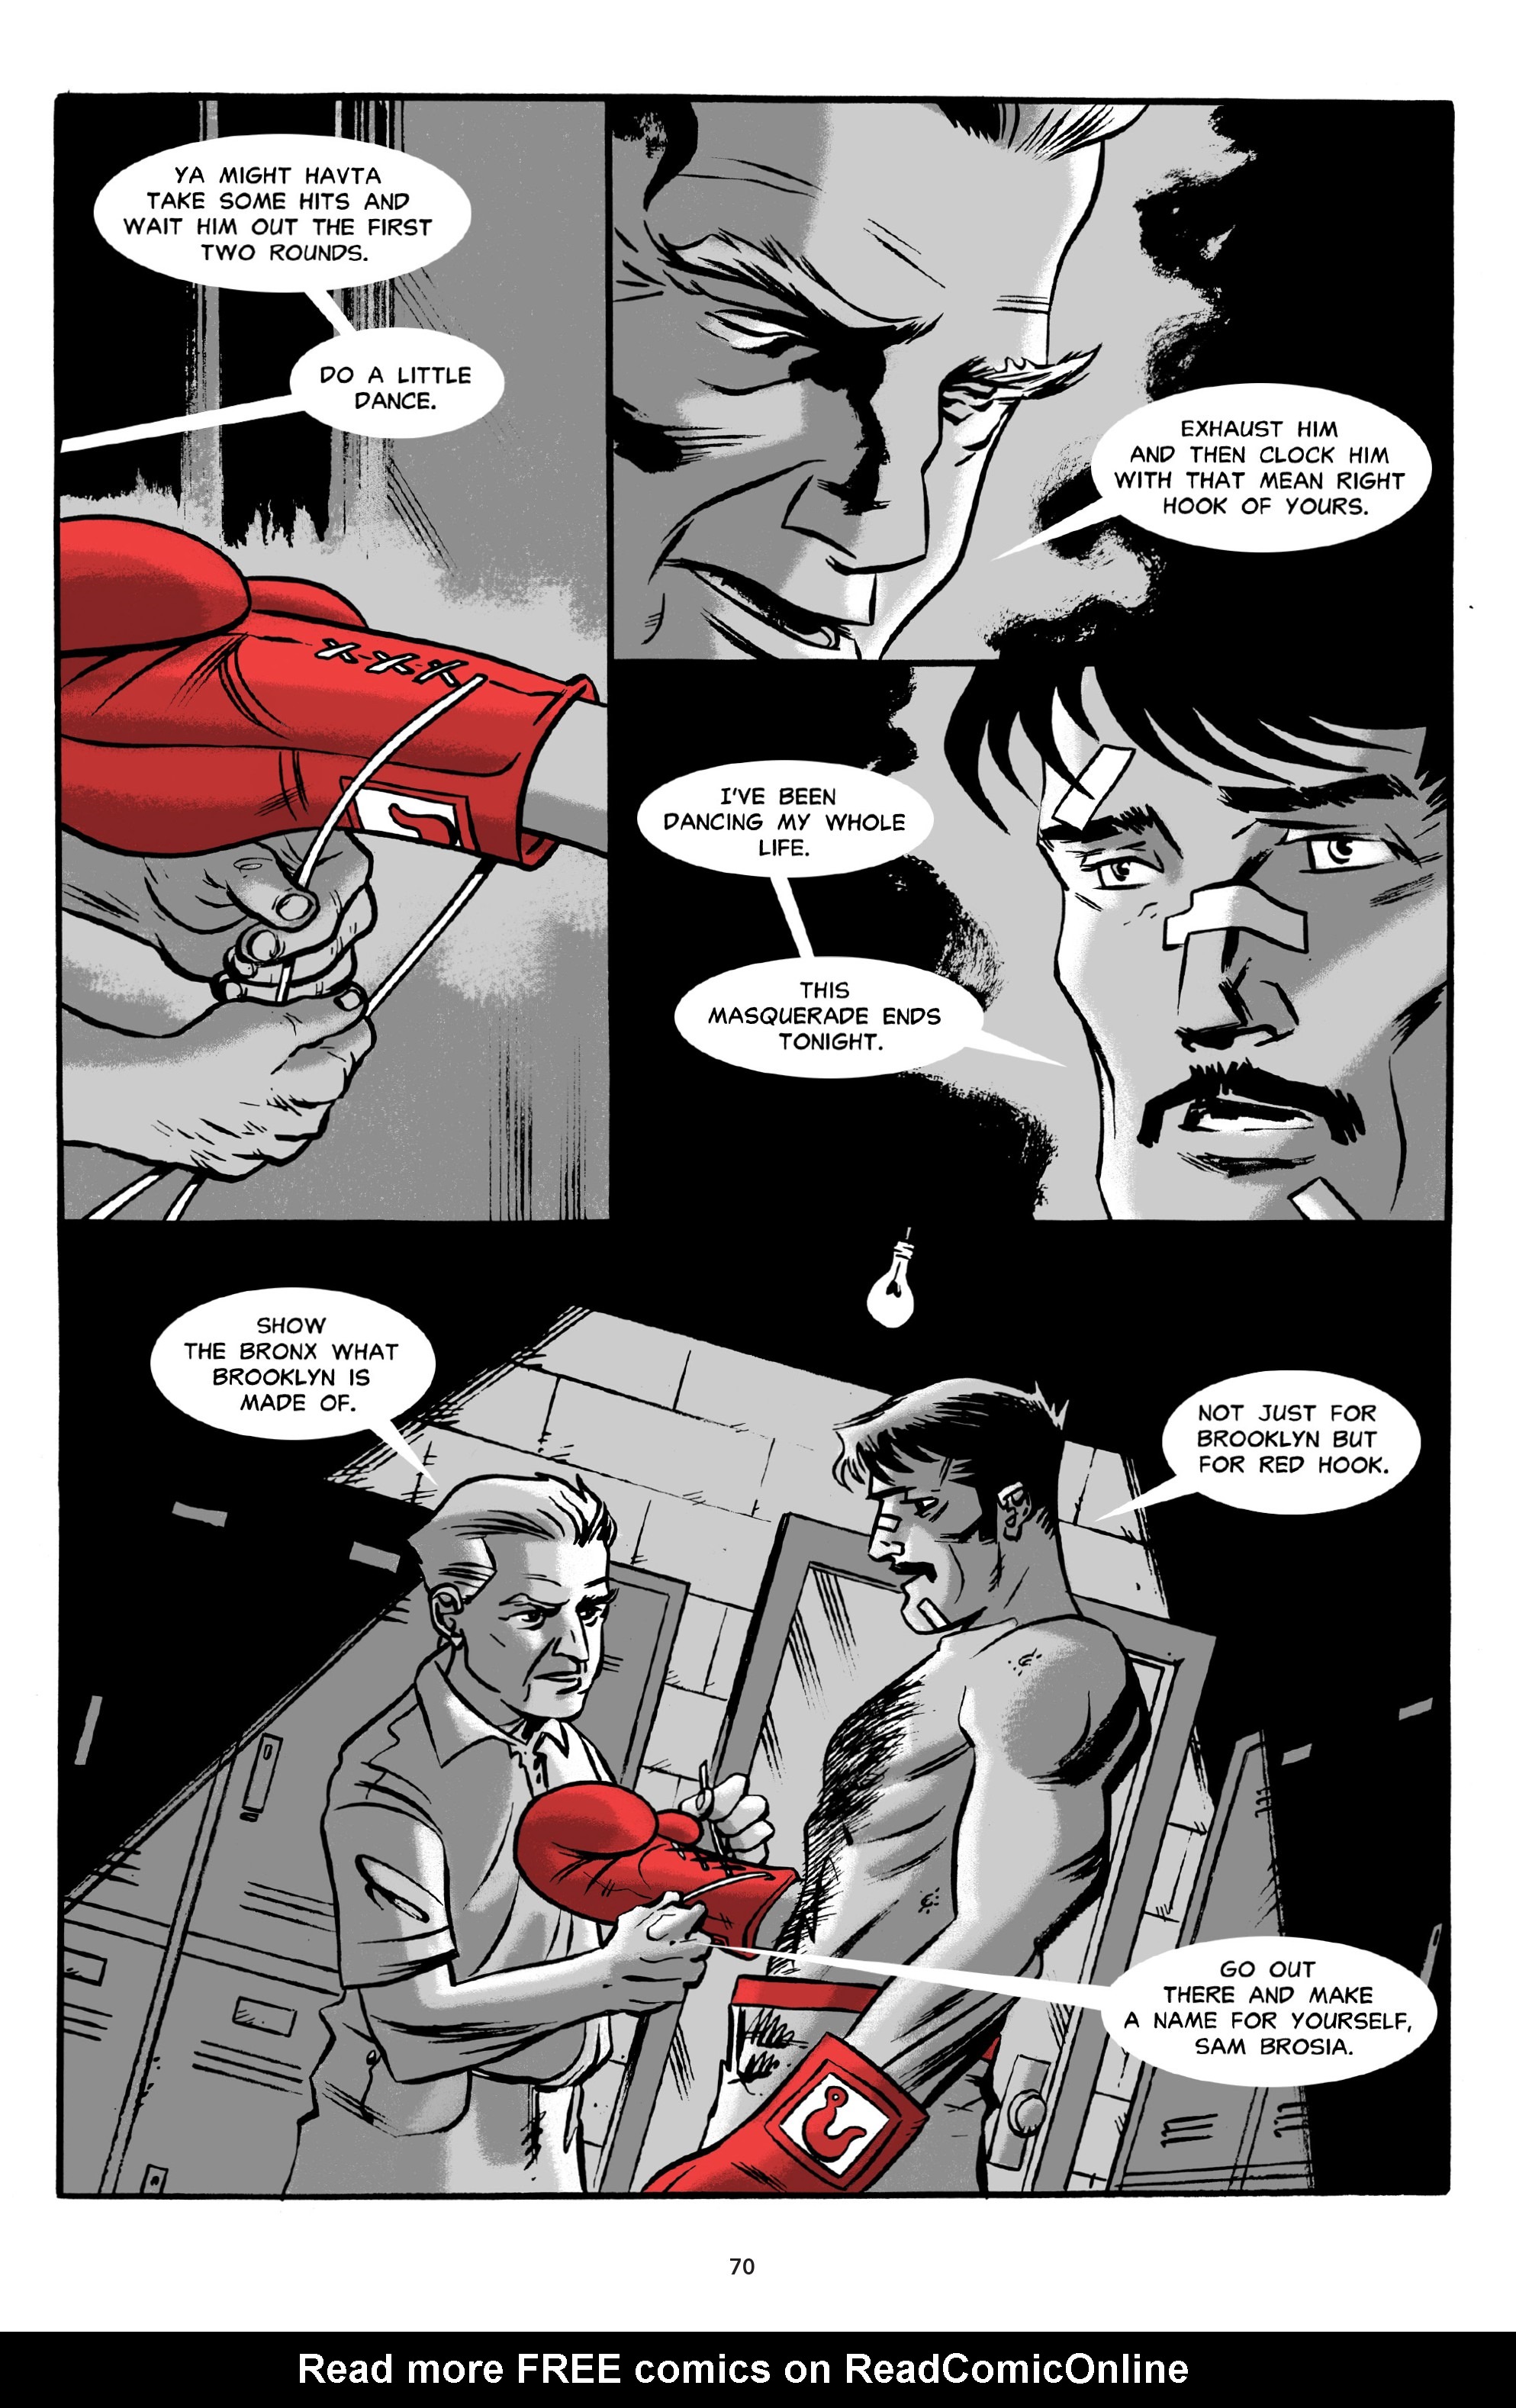 Read online The Red Hook comic -  Issue # TPB (Part 1) - 70